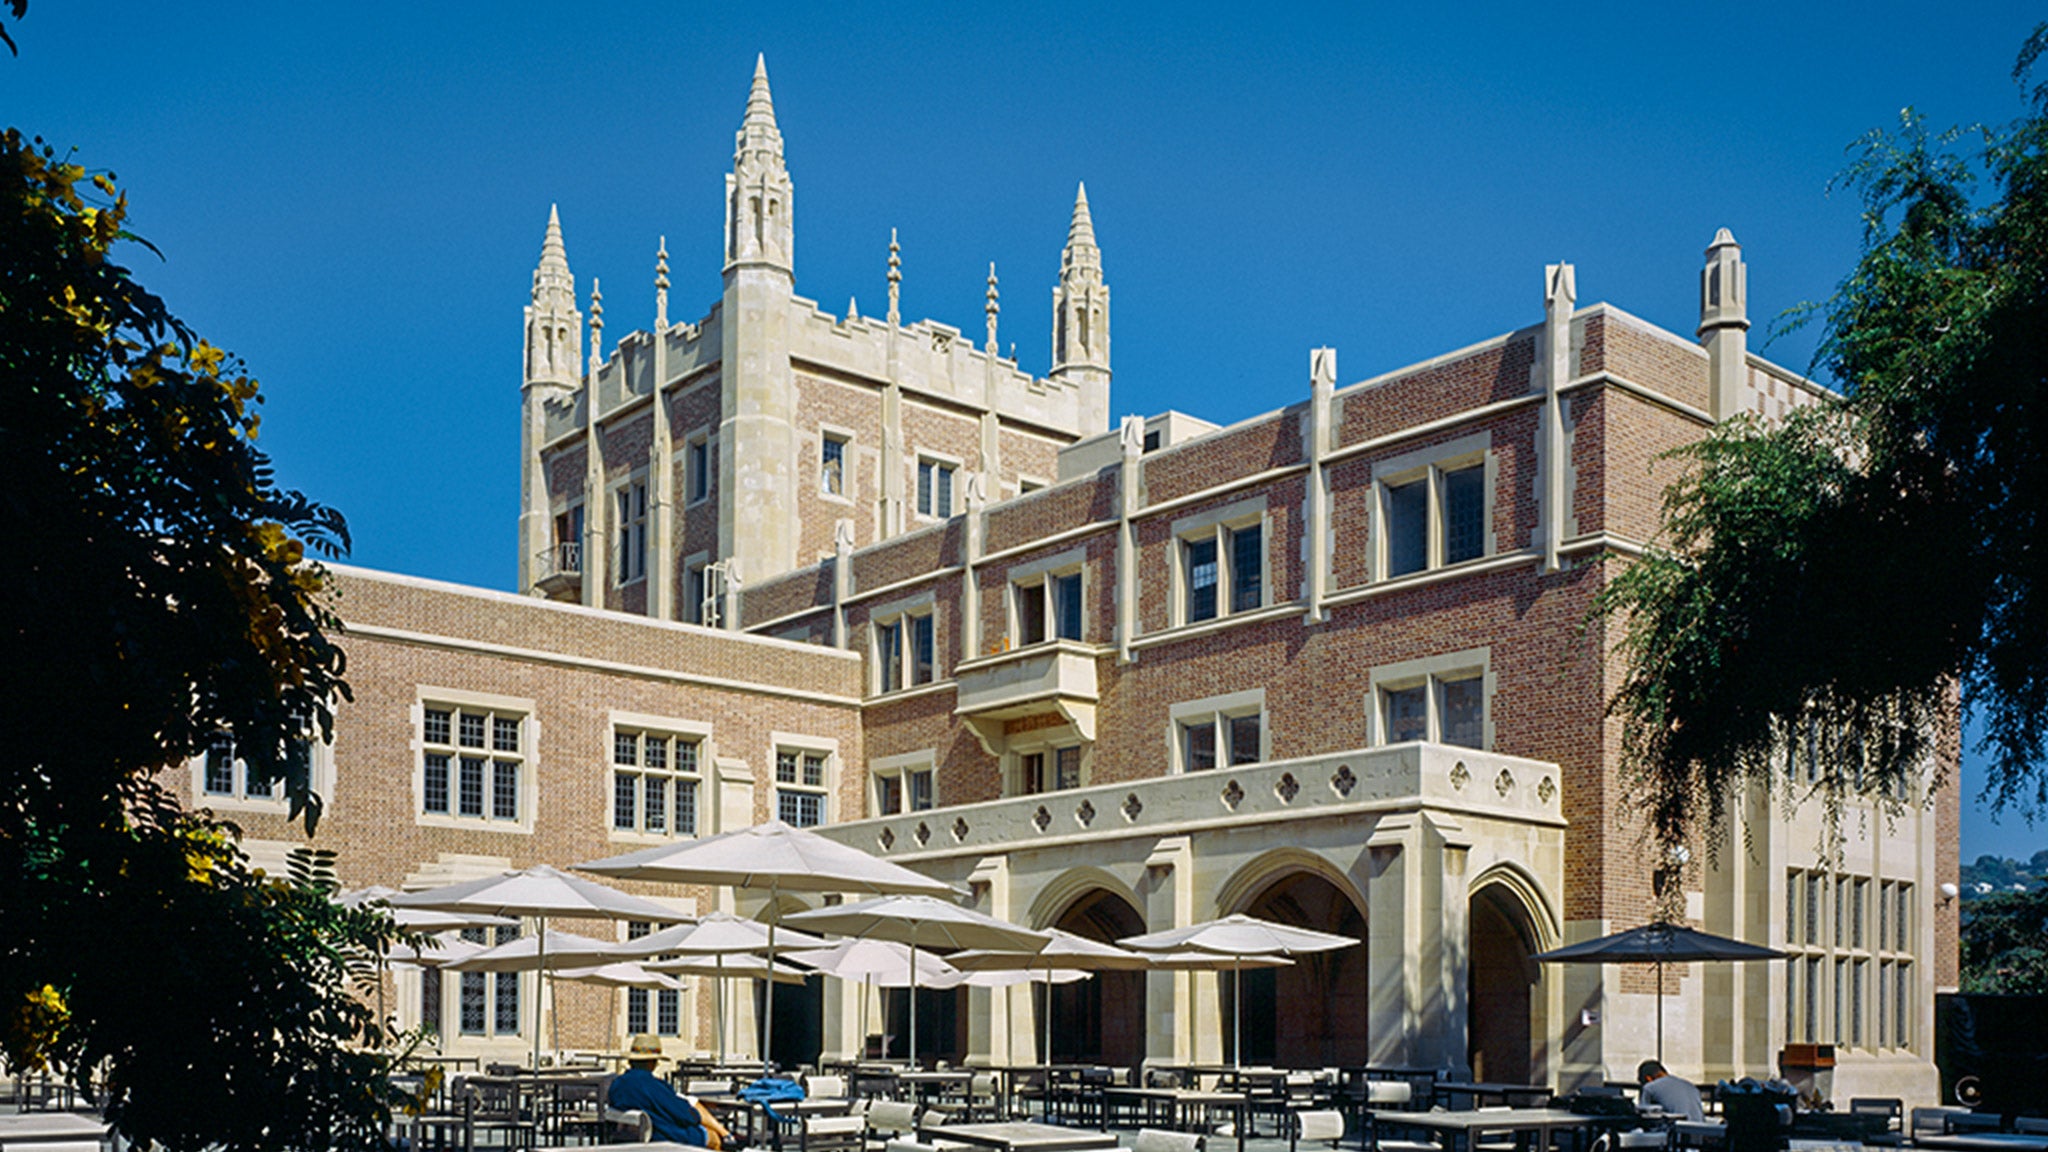 The iconic gothic spires Kerckhoff Hall bask in the afternoon sun.